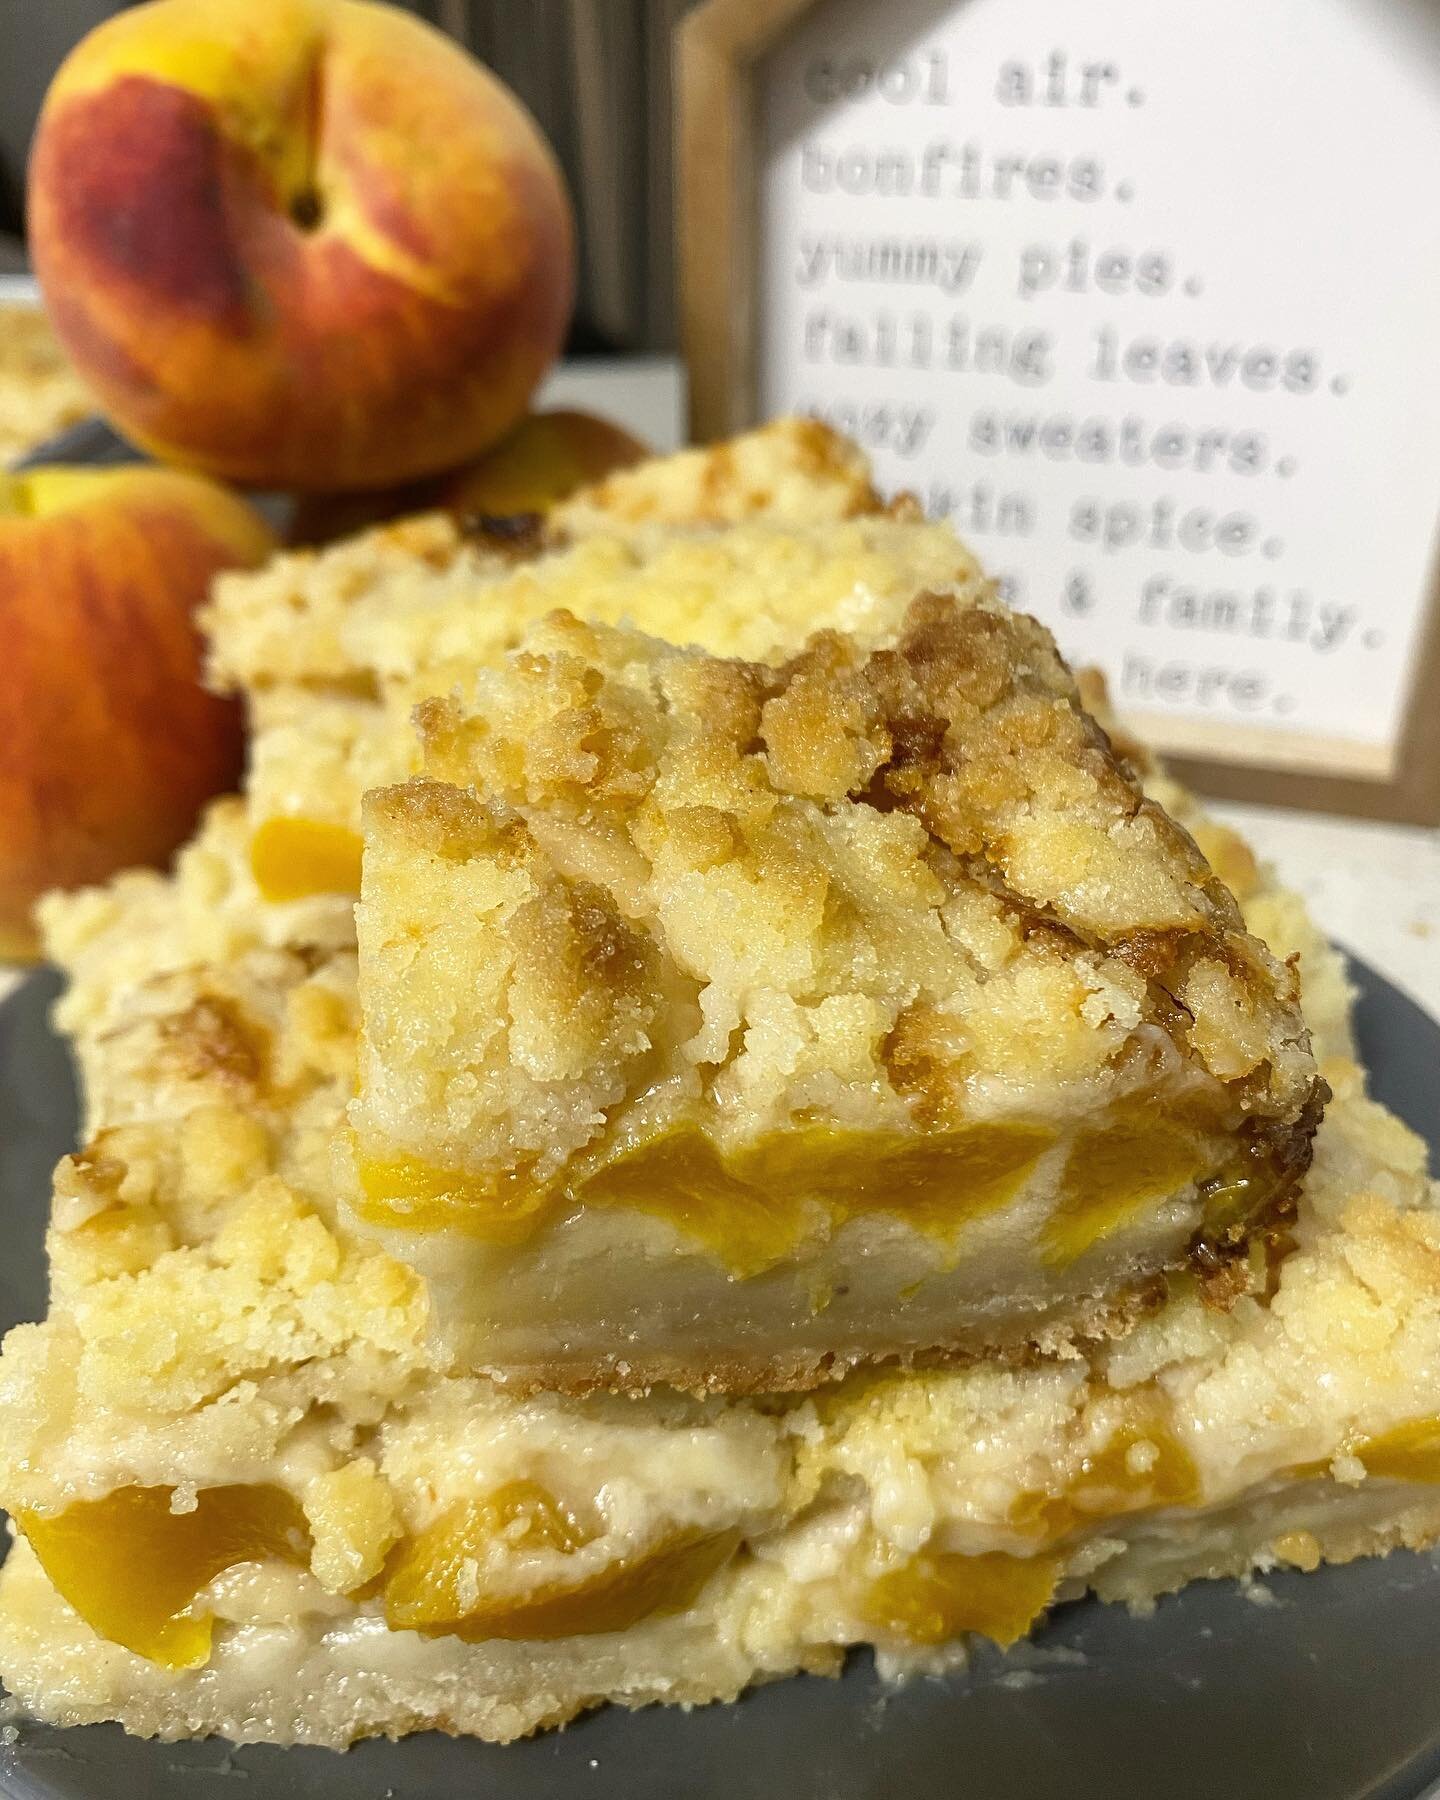 UPDATE- PREORDERS ARE SOLD OUT! Thank you all for your support! 💙

Next week we will be introducing our PEACHES + CREAM COBBLER 🍑

Fresh peaches and creamy filling on top of a buttery shortbread crust, baked with a crumble topping 😋 Our twist on t